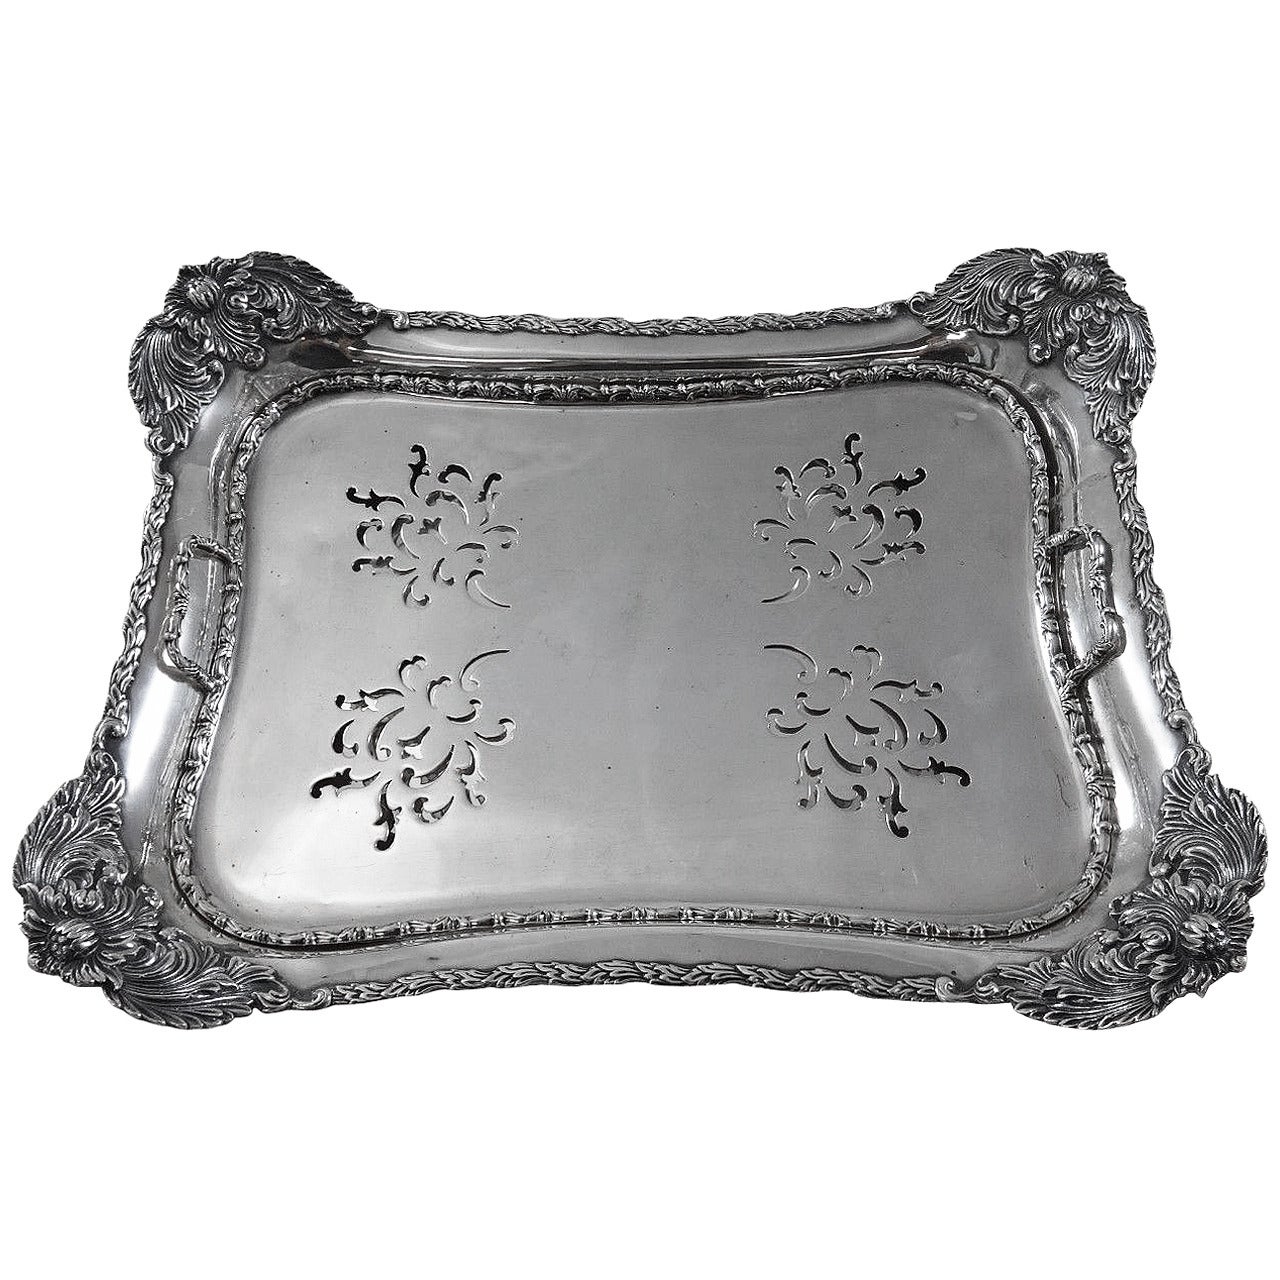 Chrysanthemum by Tiffany & Co. Sterling Silver Asparagus Tray